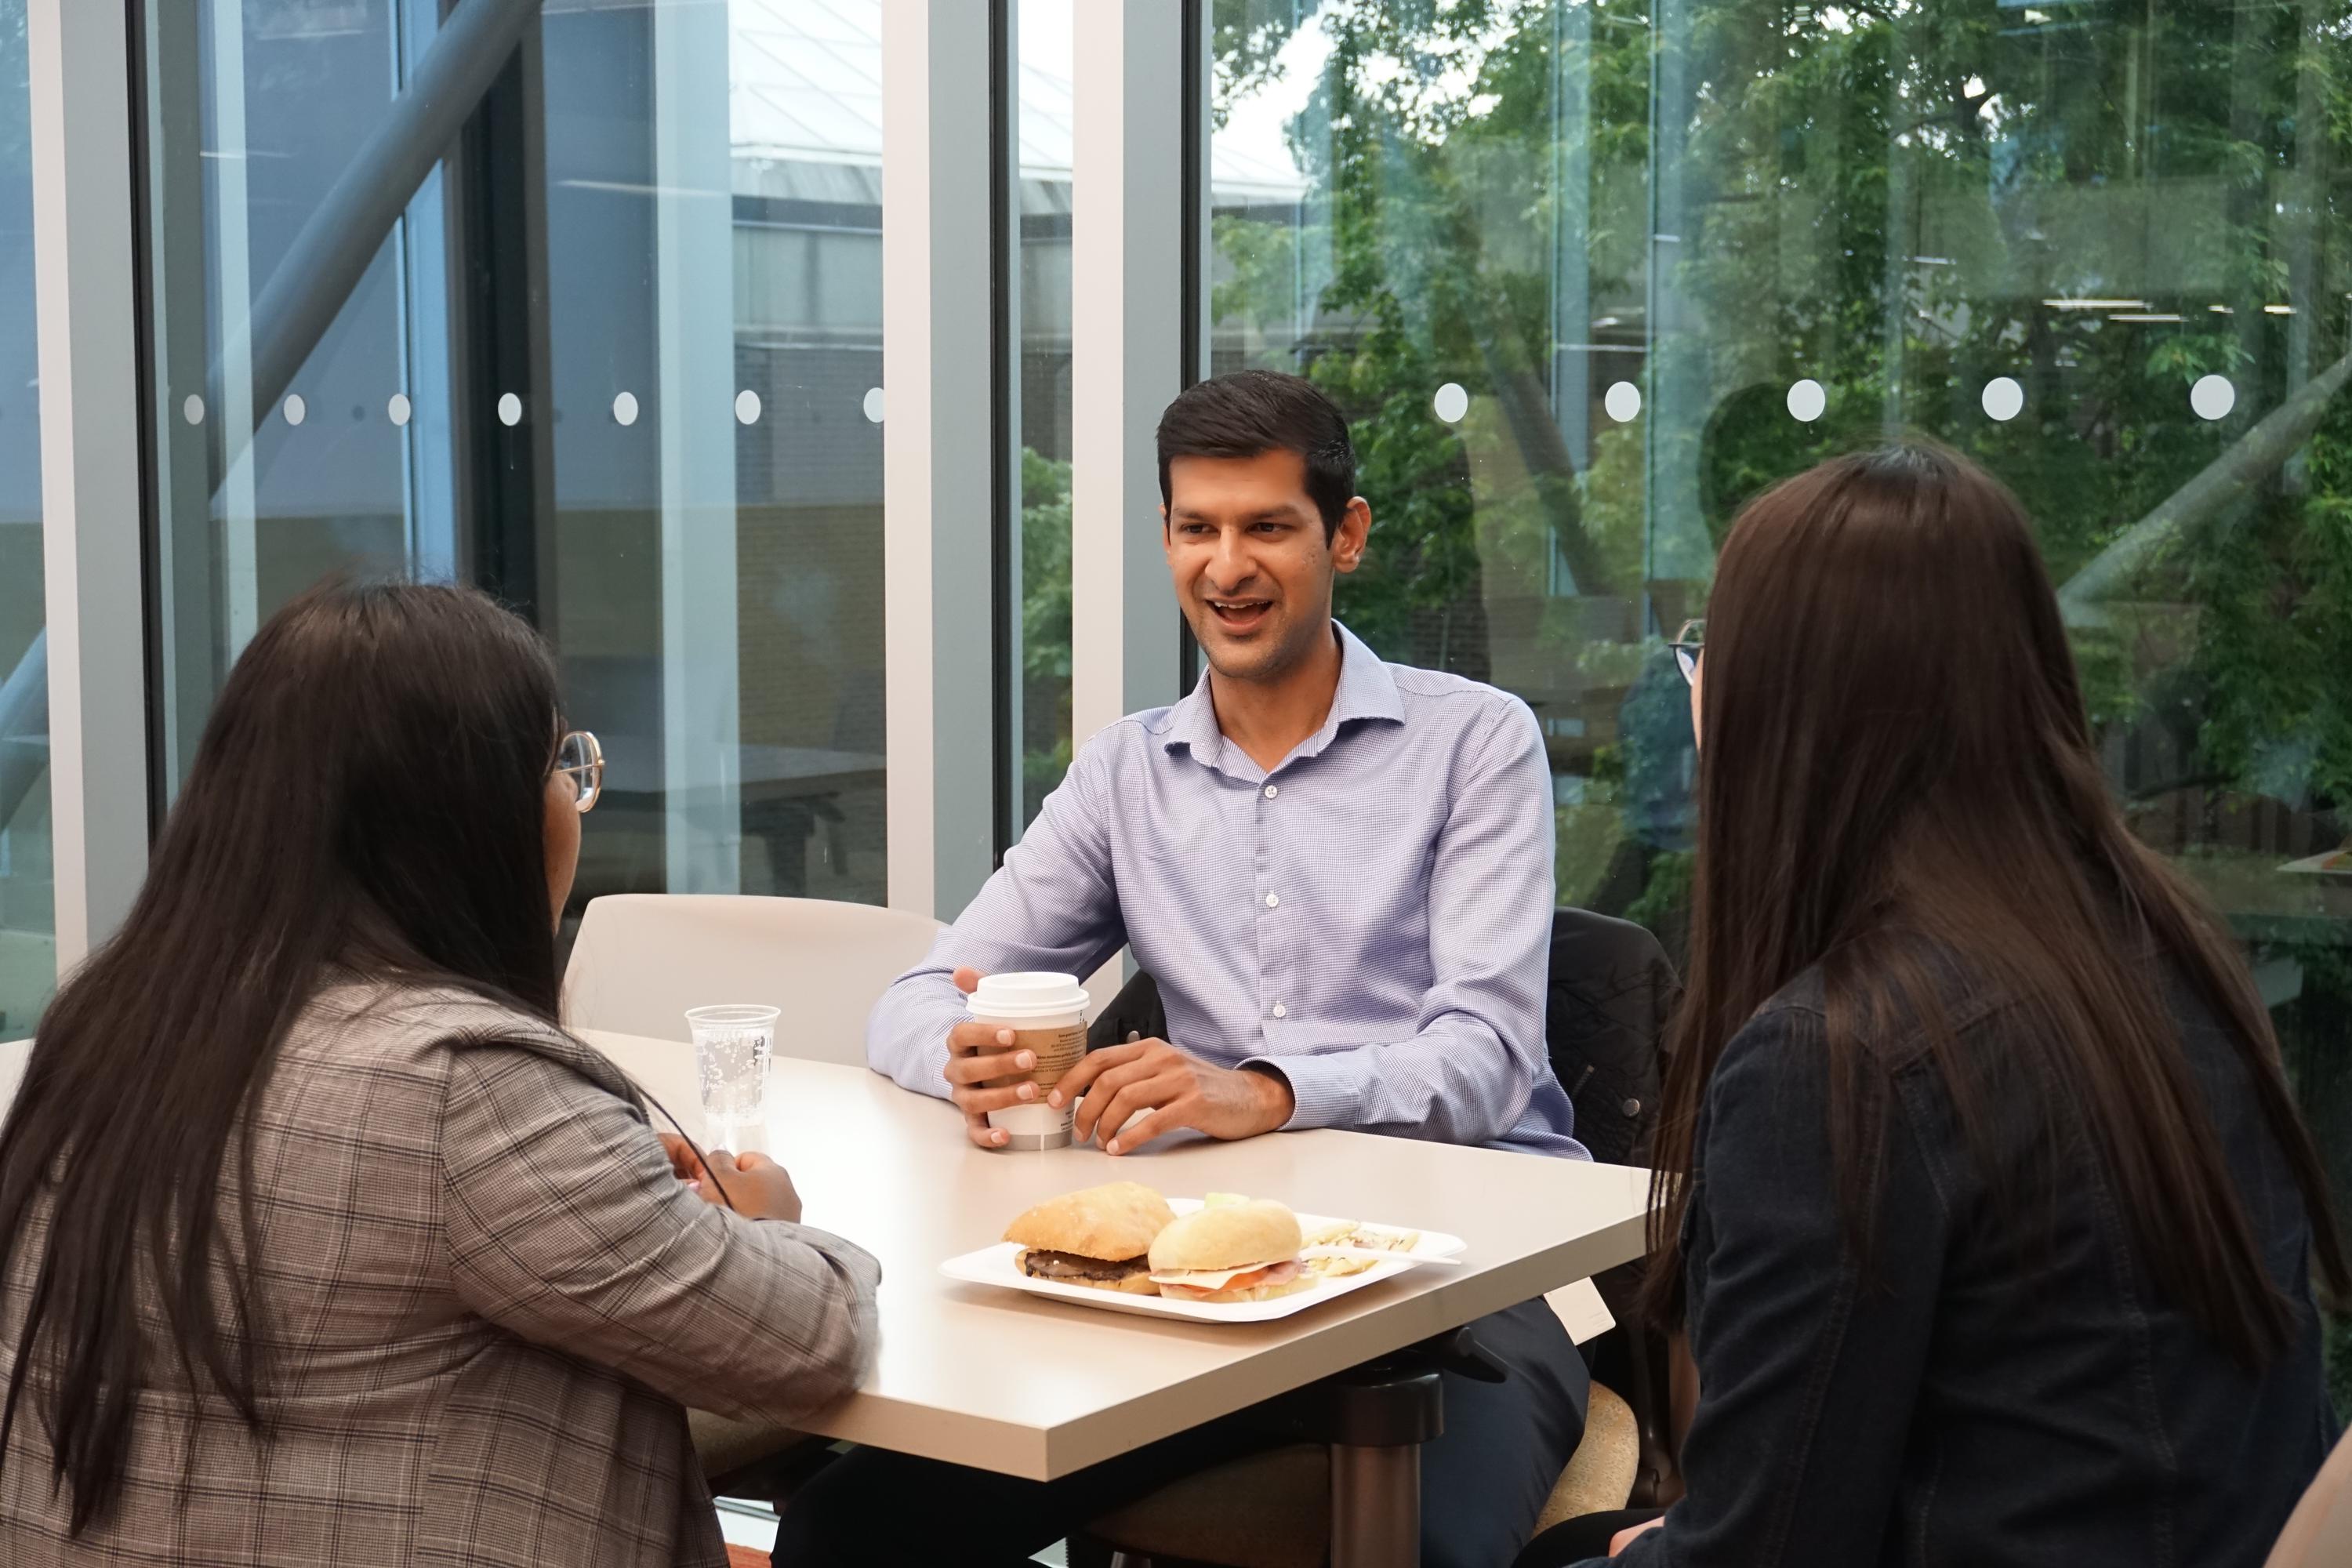 Ayaz Gullamhussein speaks with students at table